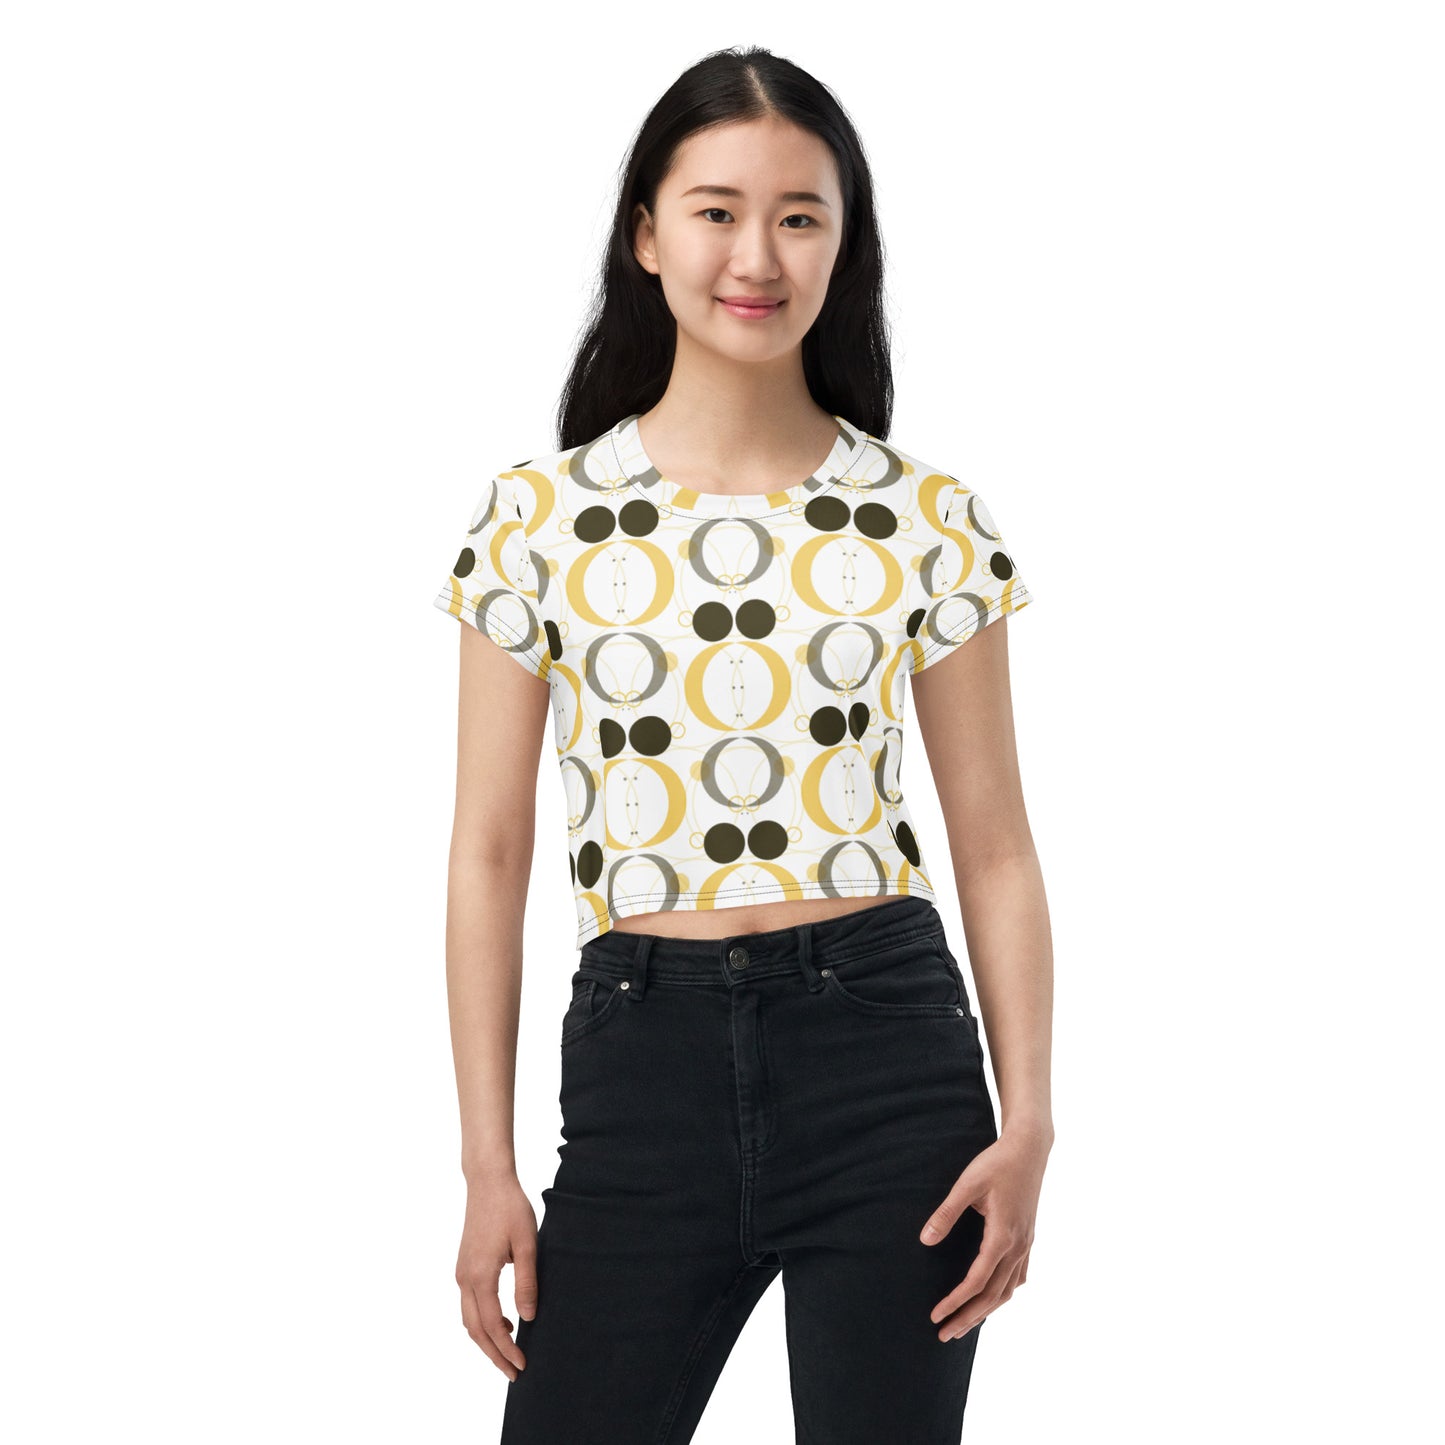 Its the 50s All-Over Print Crop Tee